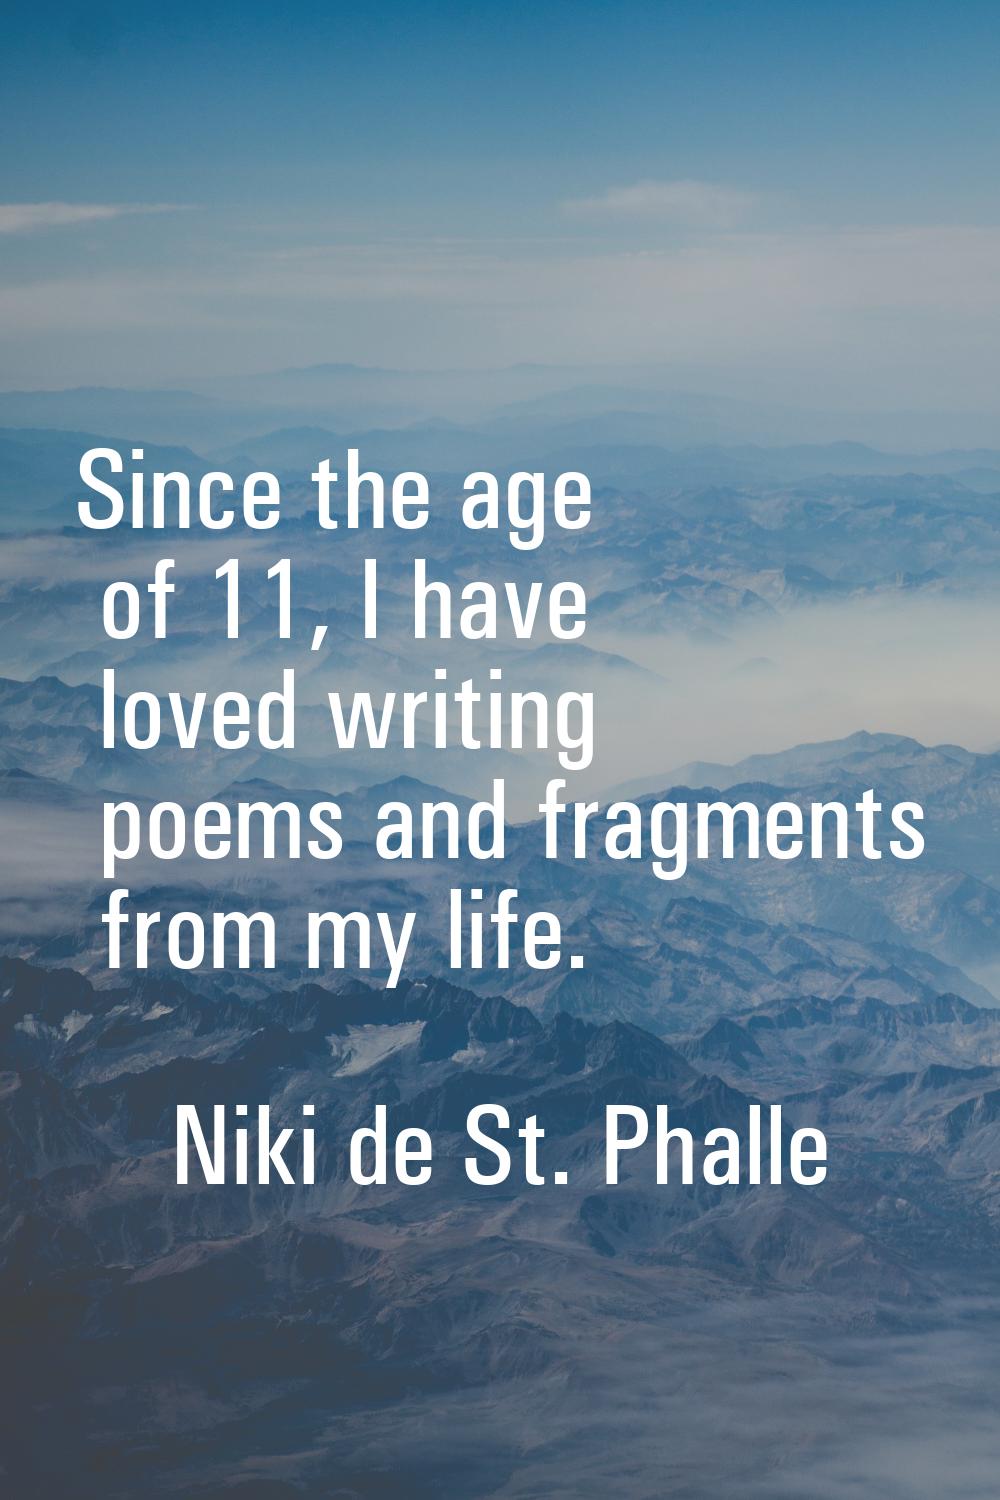 Since the age of 11, I have loved writing poems and fragments from my life.